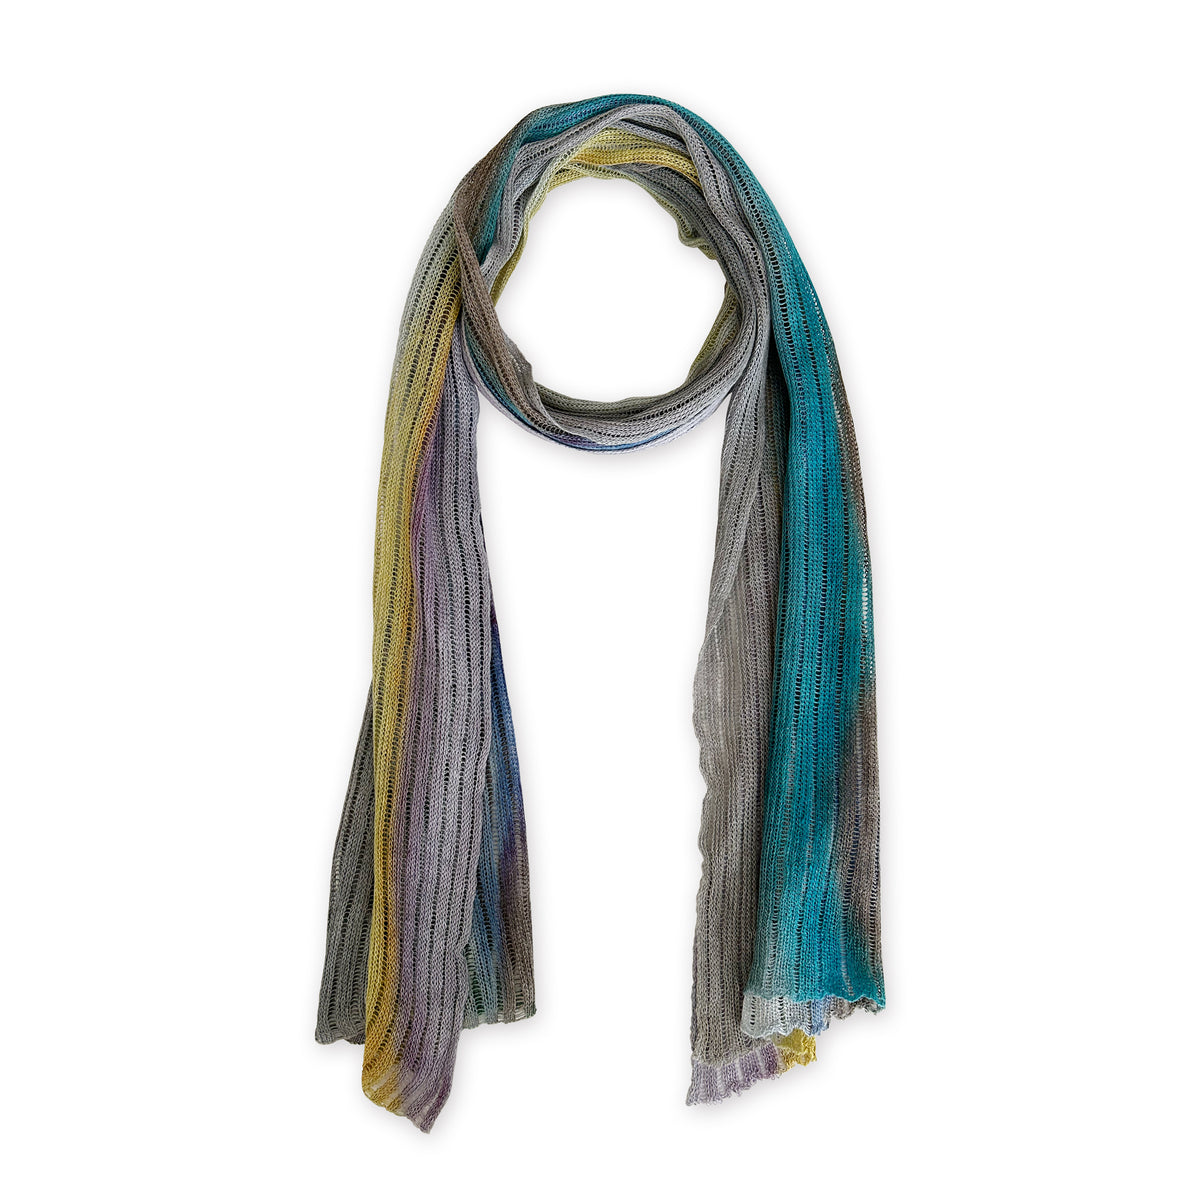 linen-scarf-hand-painted-35x200cm-gray-blue-green-otta-italy-2413